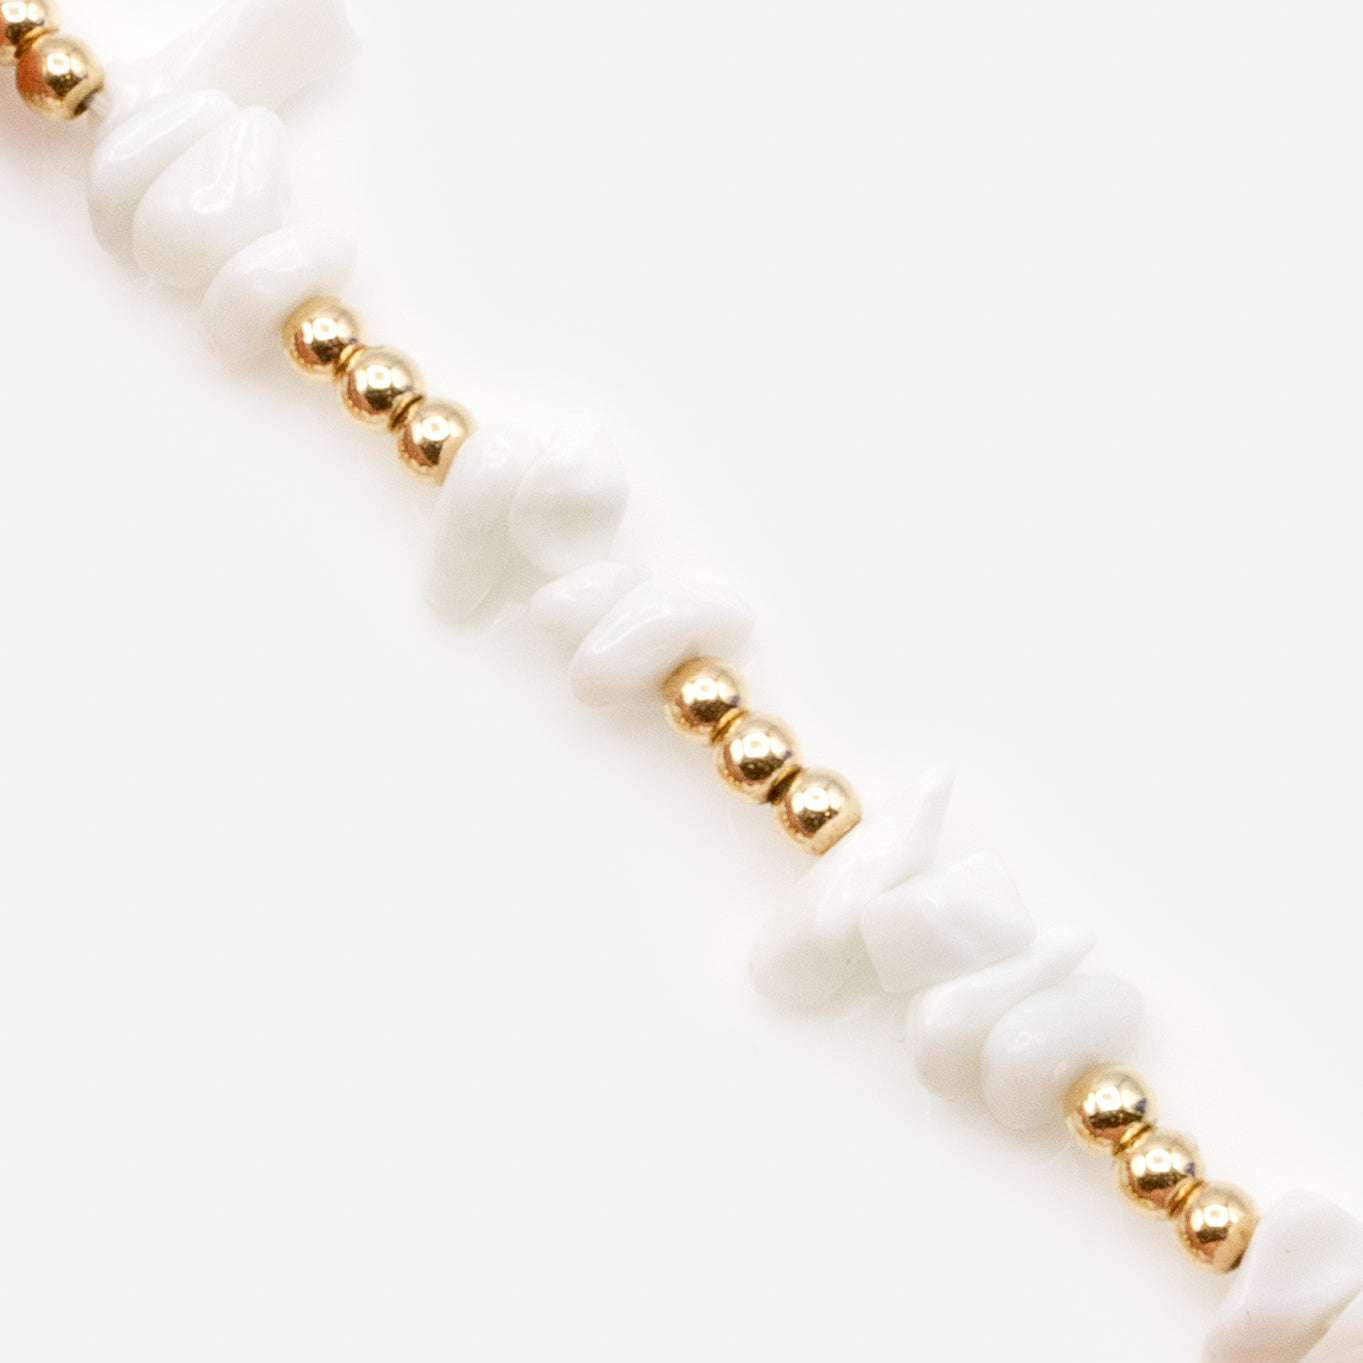 Duo of extendable anklets with white stones and gold beads